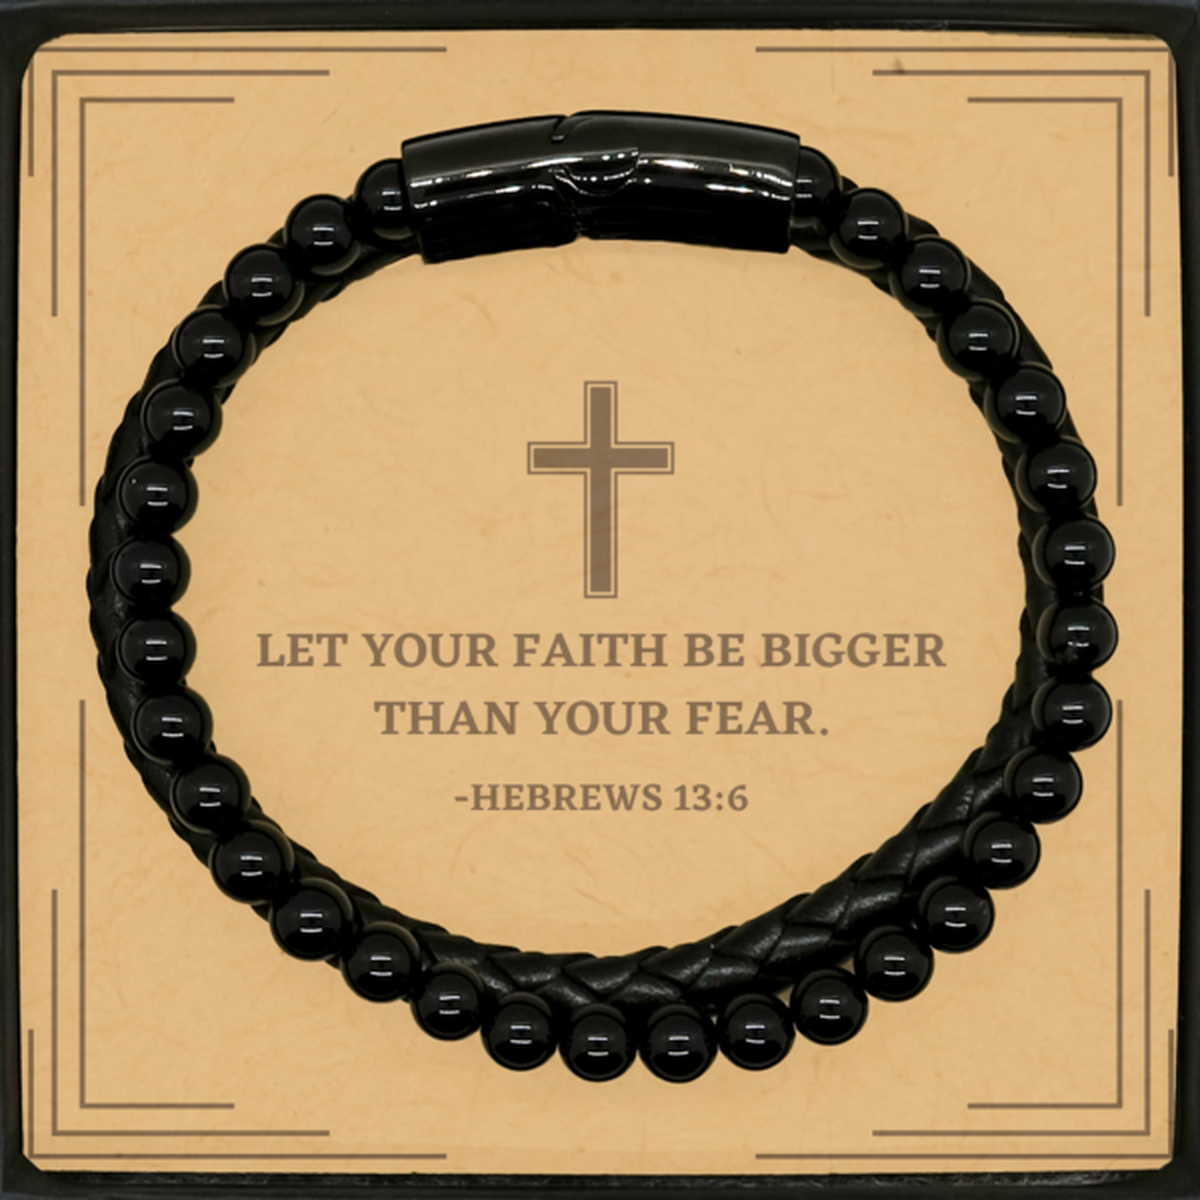 Baptism Gifts For Teenage Boys Girls, Christian Bible Verse Stone Leather Bracelet, Let your faith be bigger than your fear, Confirmation Gifts, Bible Verse Card for Son, Godson, Grandson